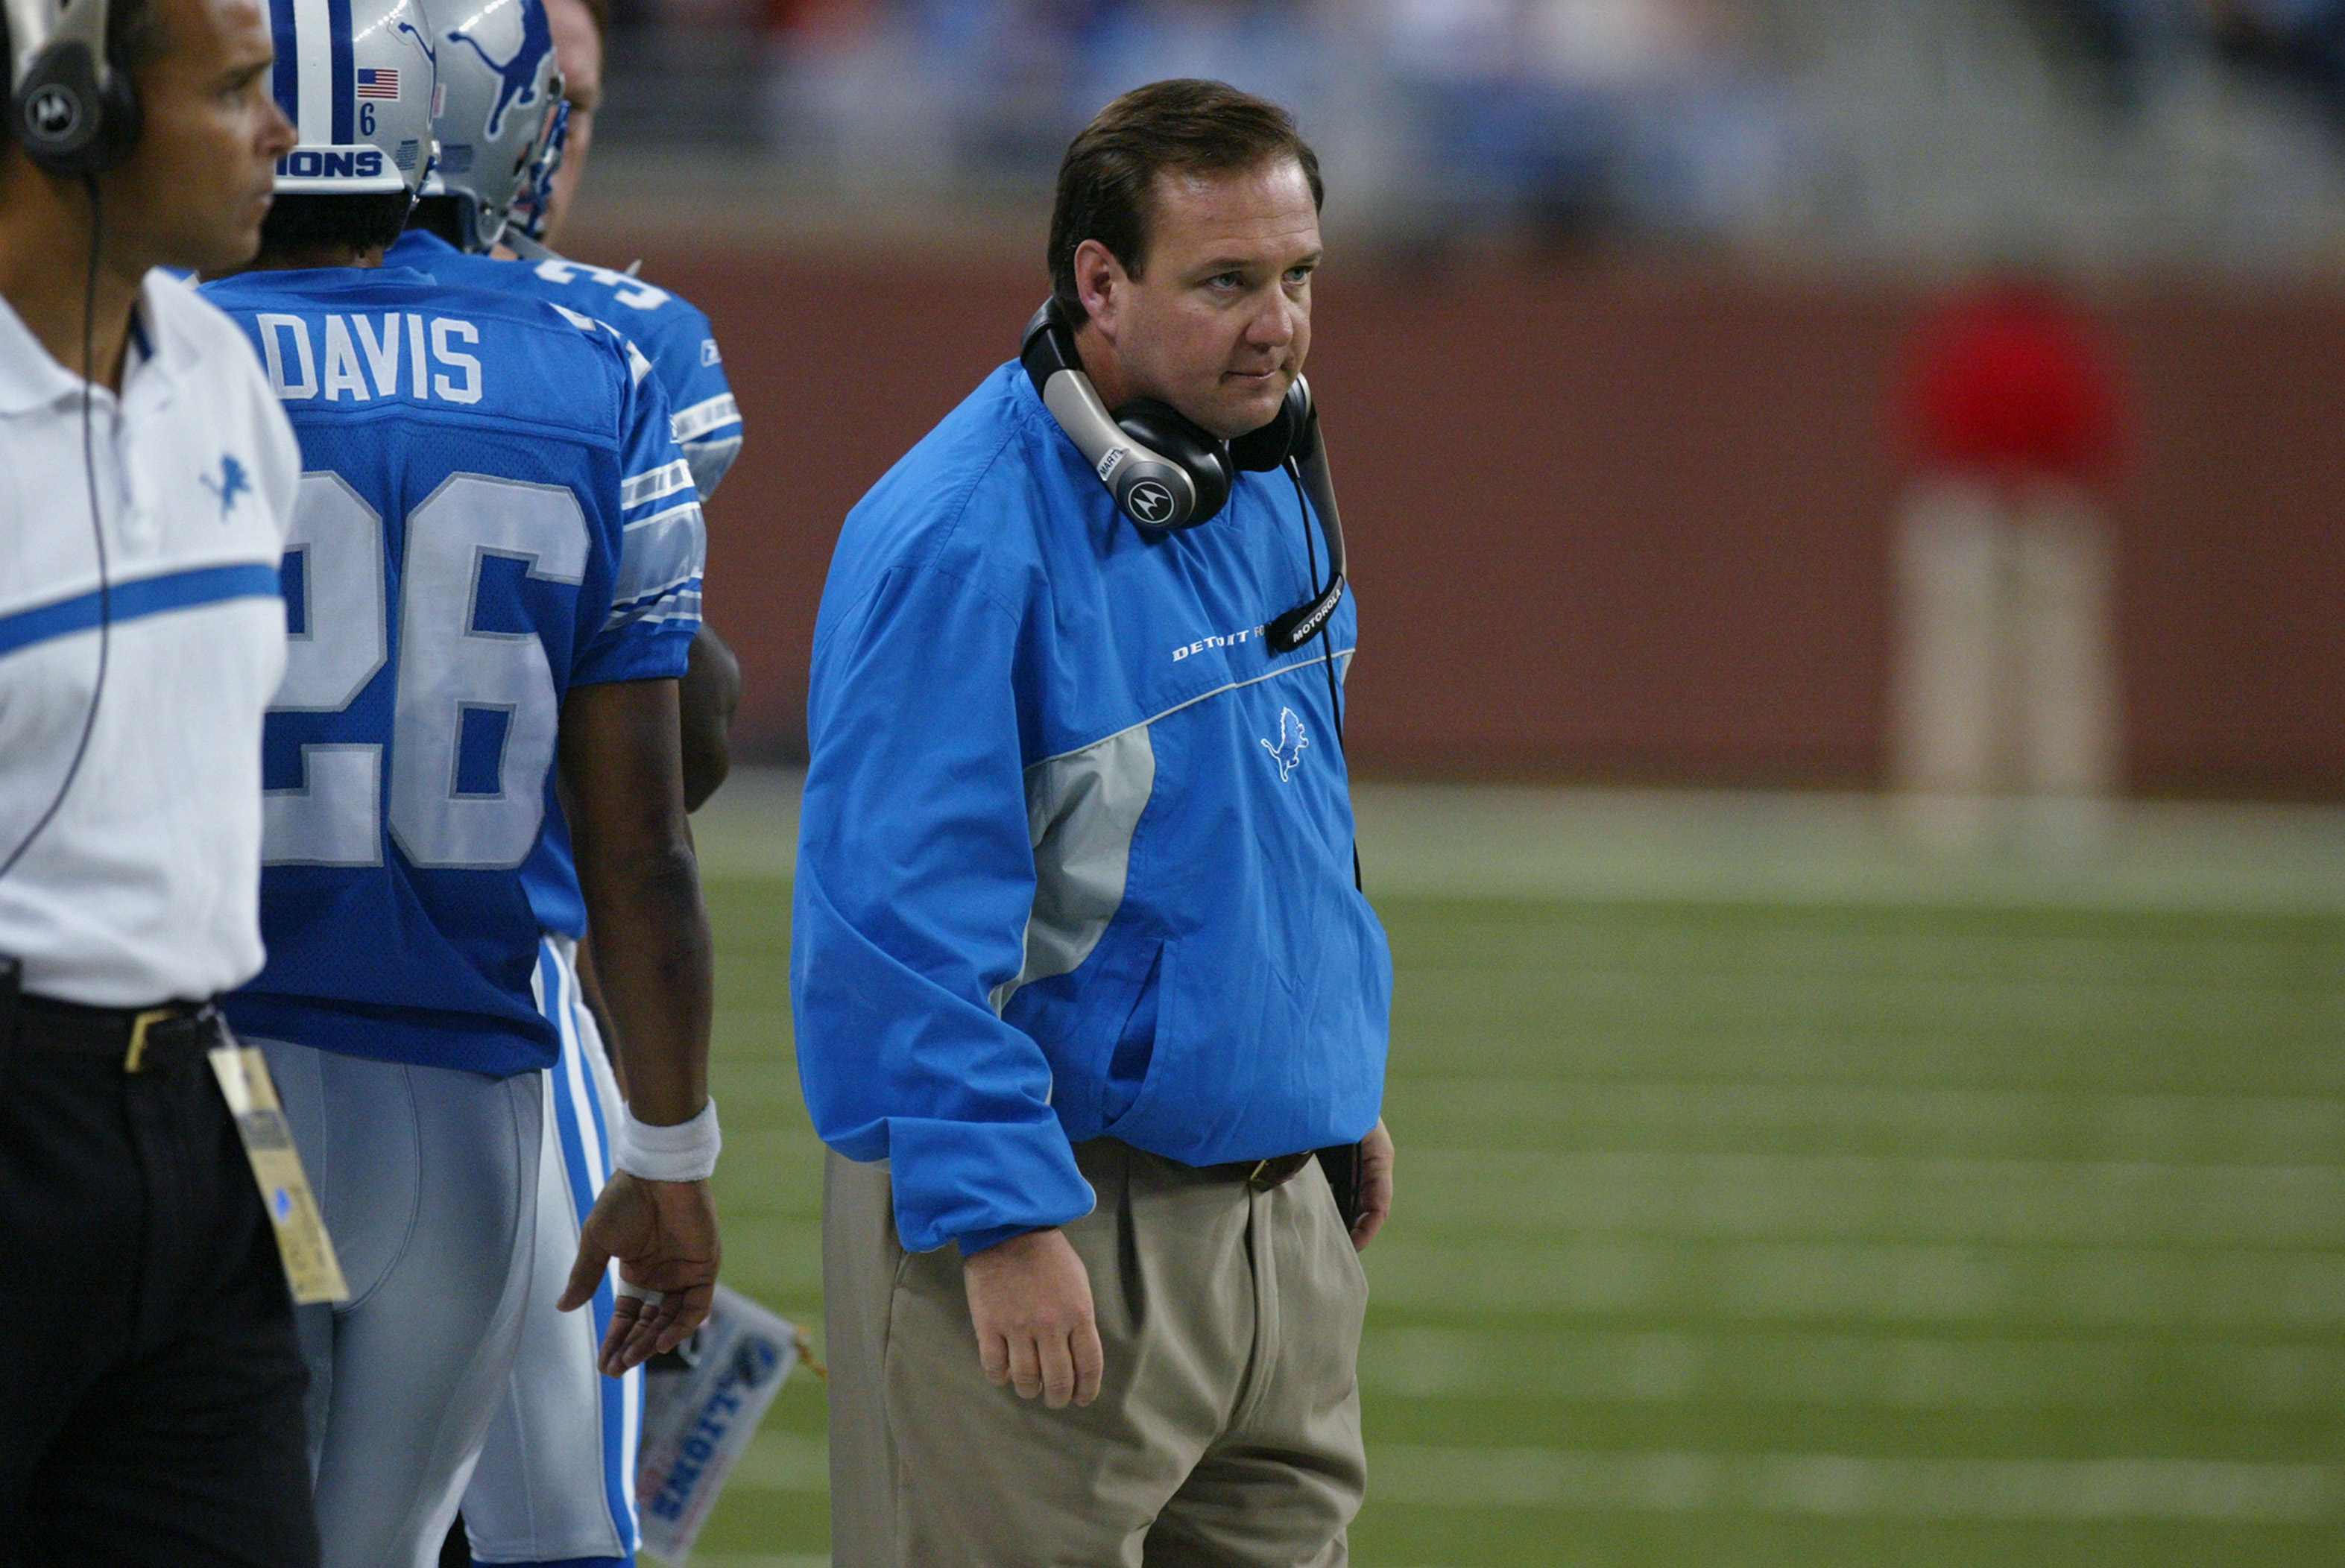 DETROIT - OCTOBER 20:  Head coach Marty Mornhinweg of the Detroit Lions looks on from the sideline during the NFL game against the Chicago Bears at Ford Field on October 20, 2002 in Detroit, Michigan. The Lions beat the Bears in overtime 23-20.  (Photo by Danny Moloshok/Getty Images)